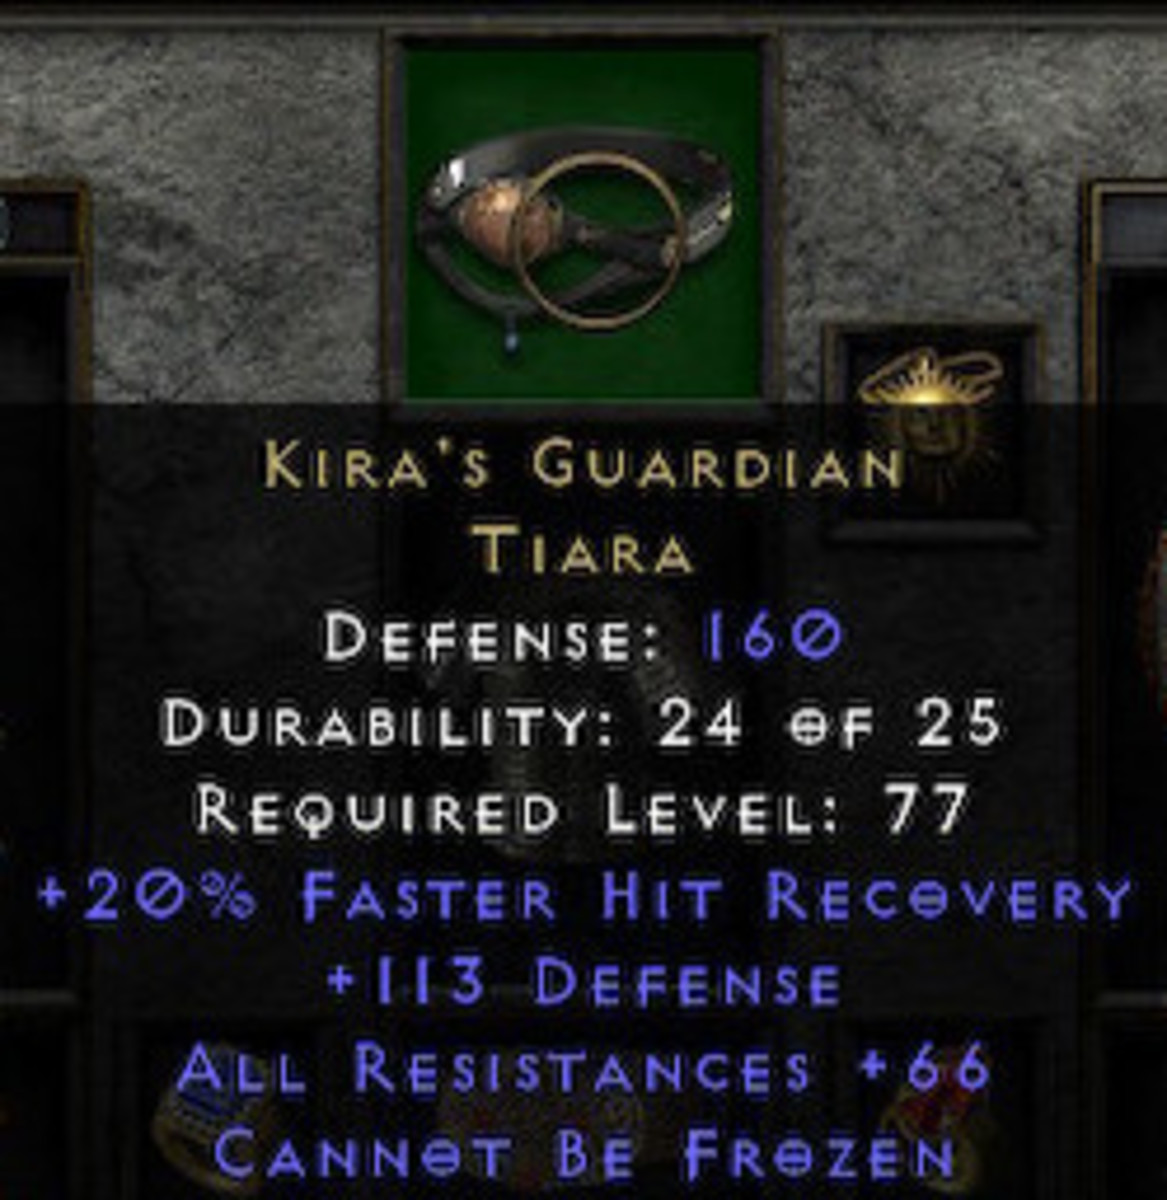 This helm can offer a variety of resistances.